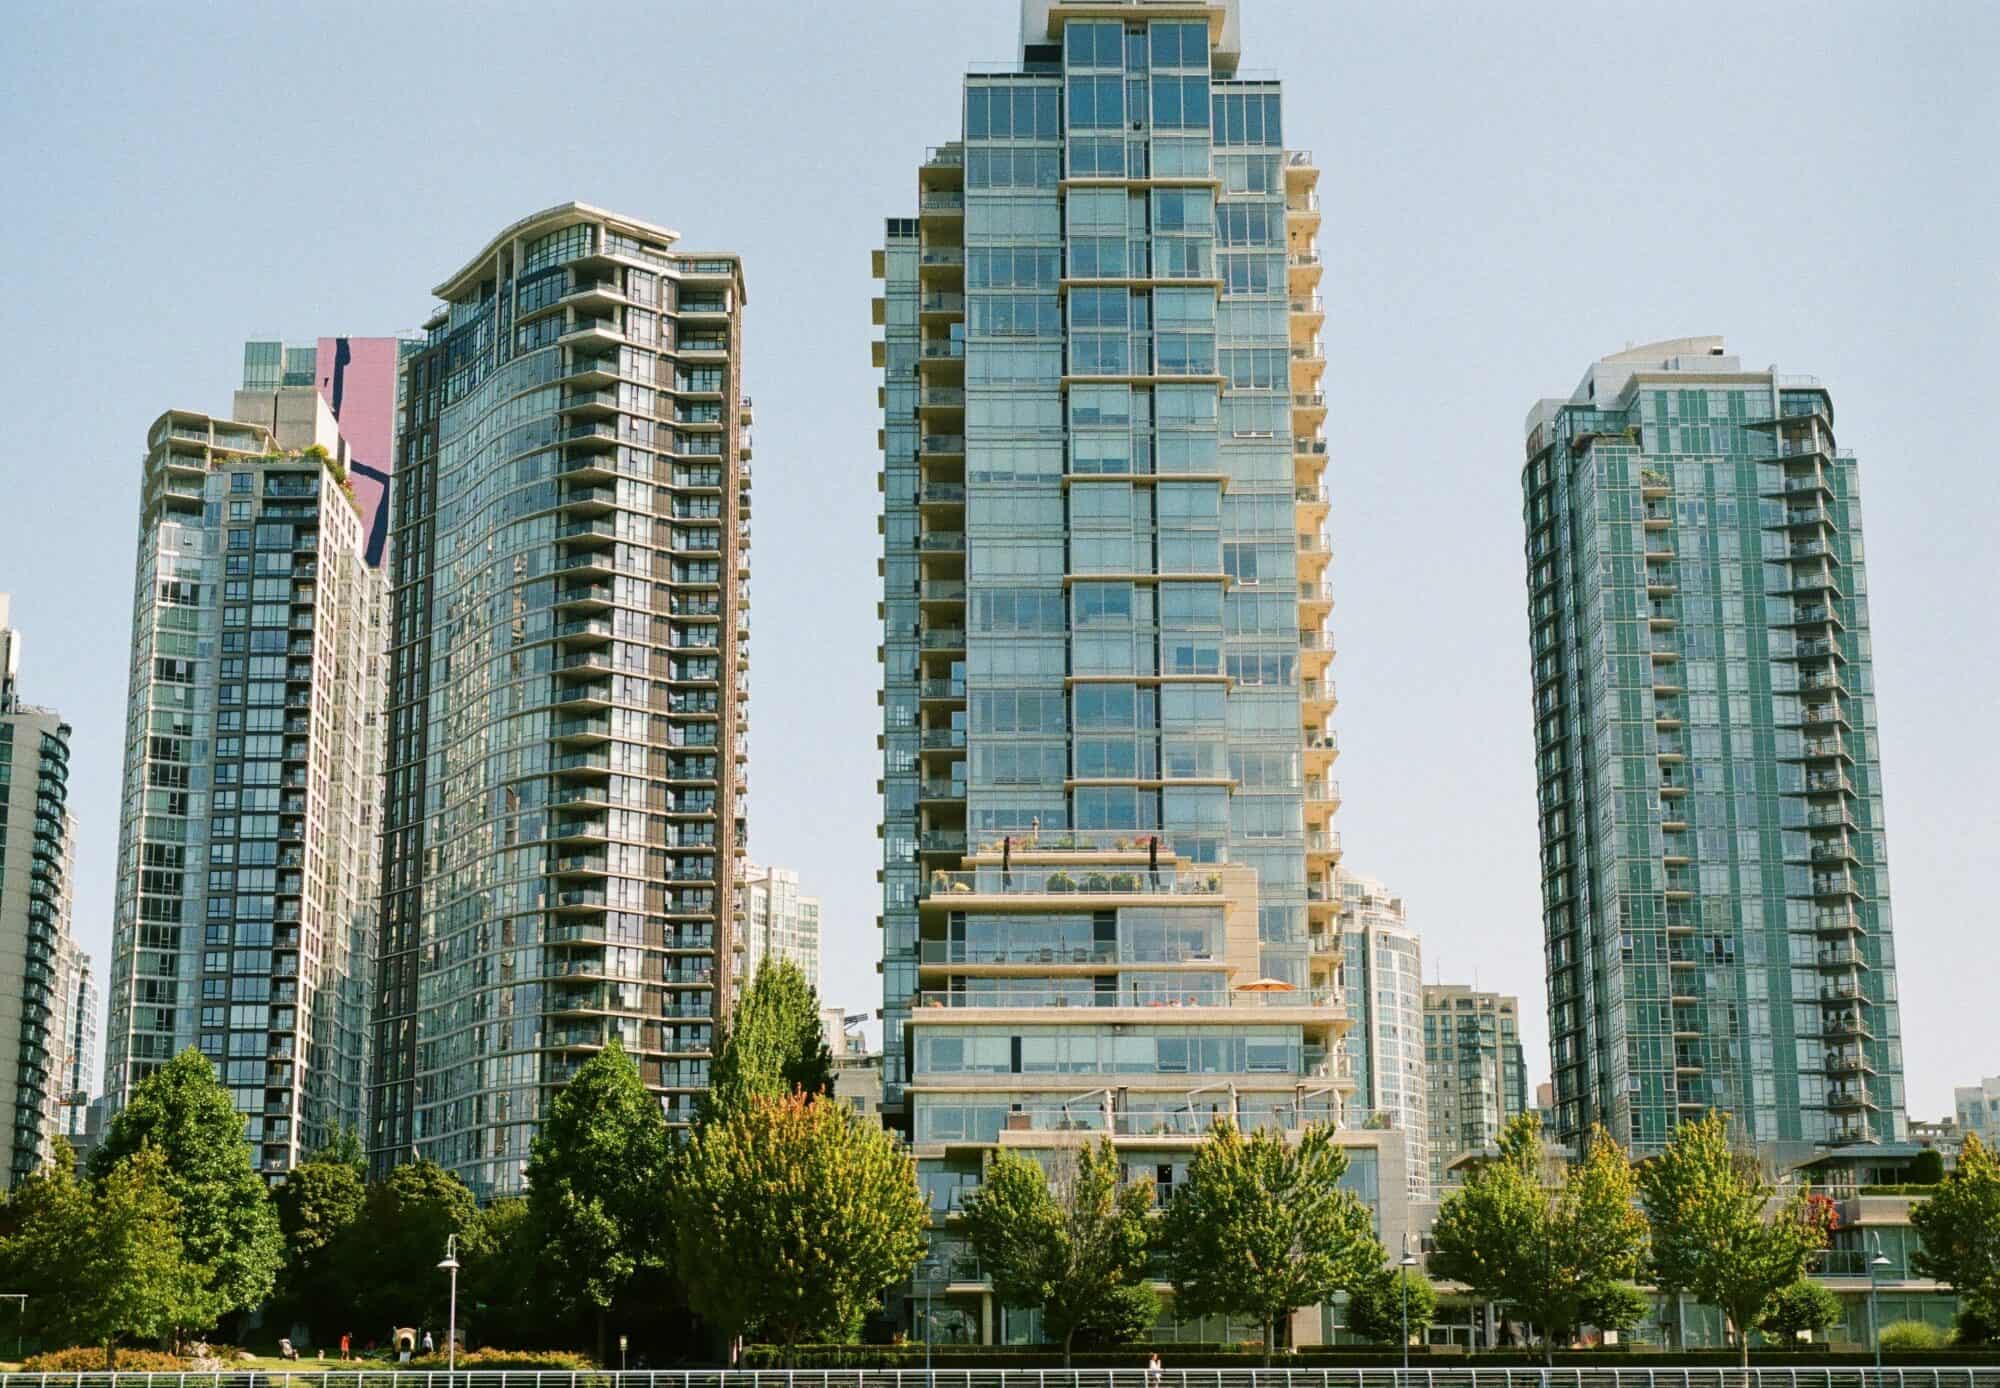 A neighbourhood of condo towers in downtown Vancouver.